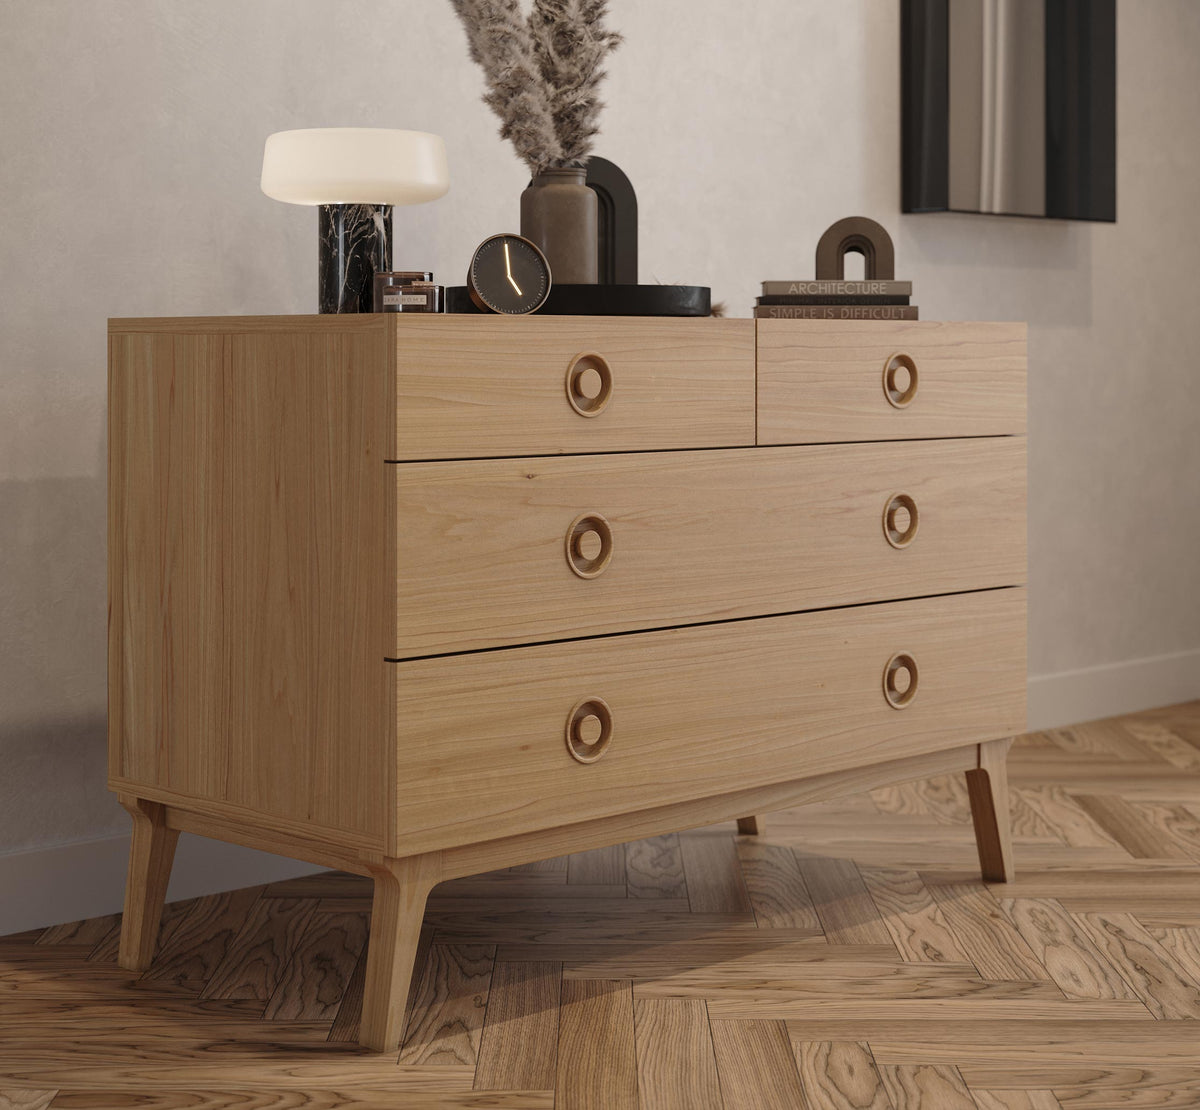 Case Valentine Chest of Drawers